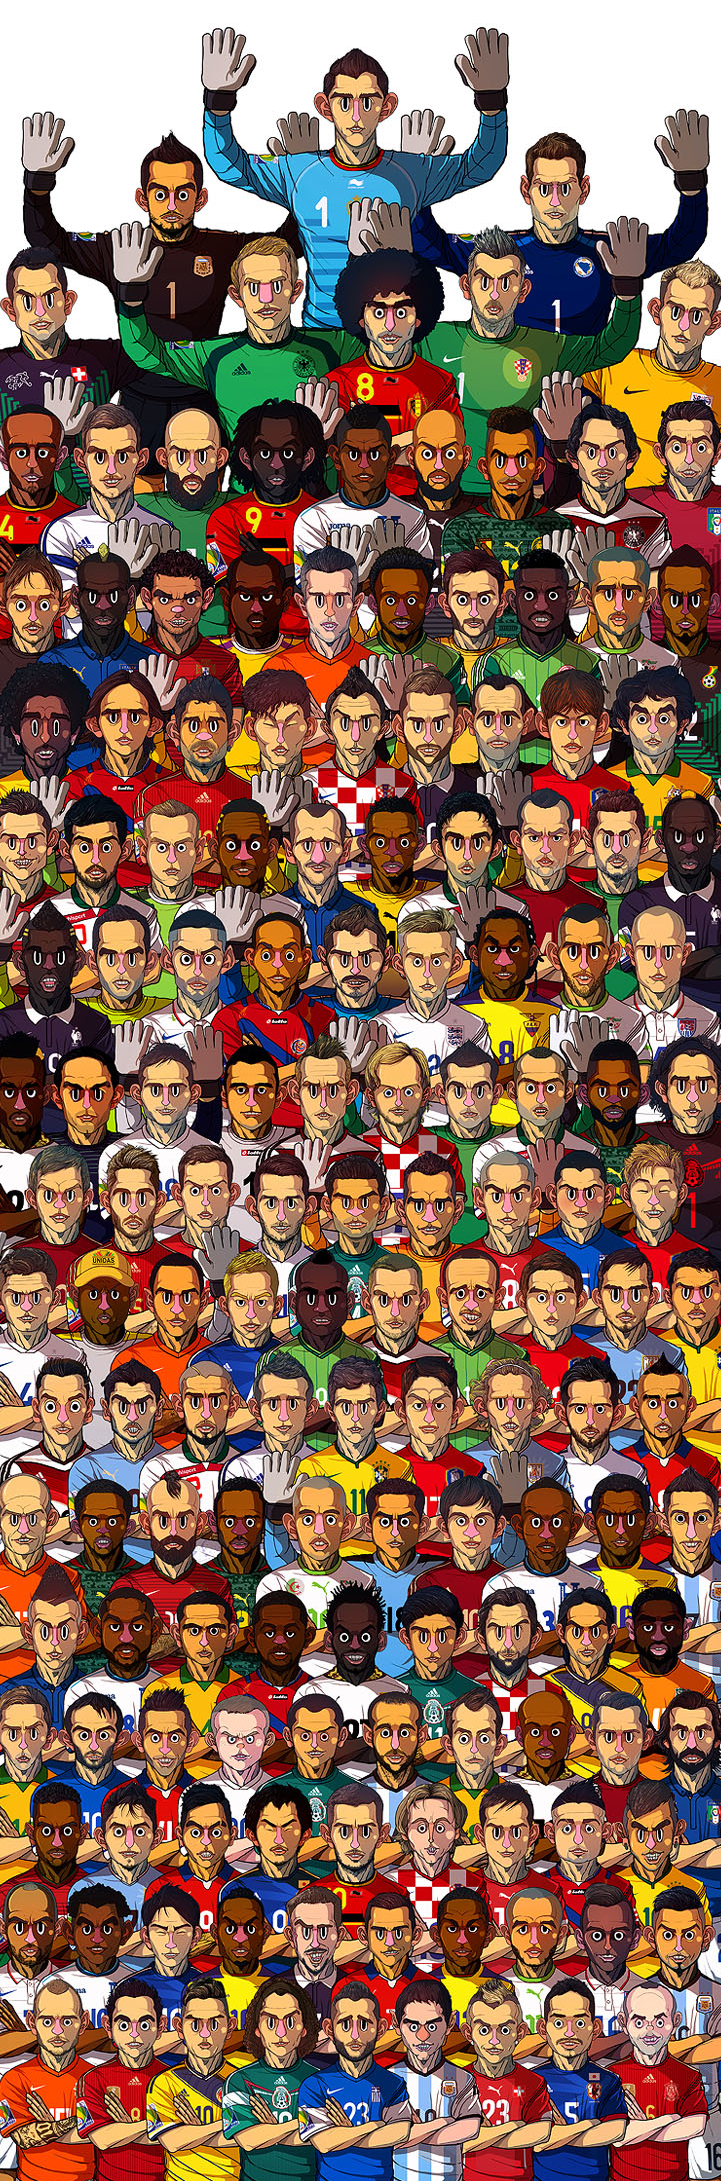 2014-Brazil-World-Cup-32-teams-on-Behance-2014-06-27-11-11-29.png